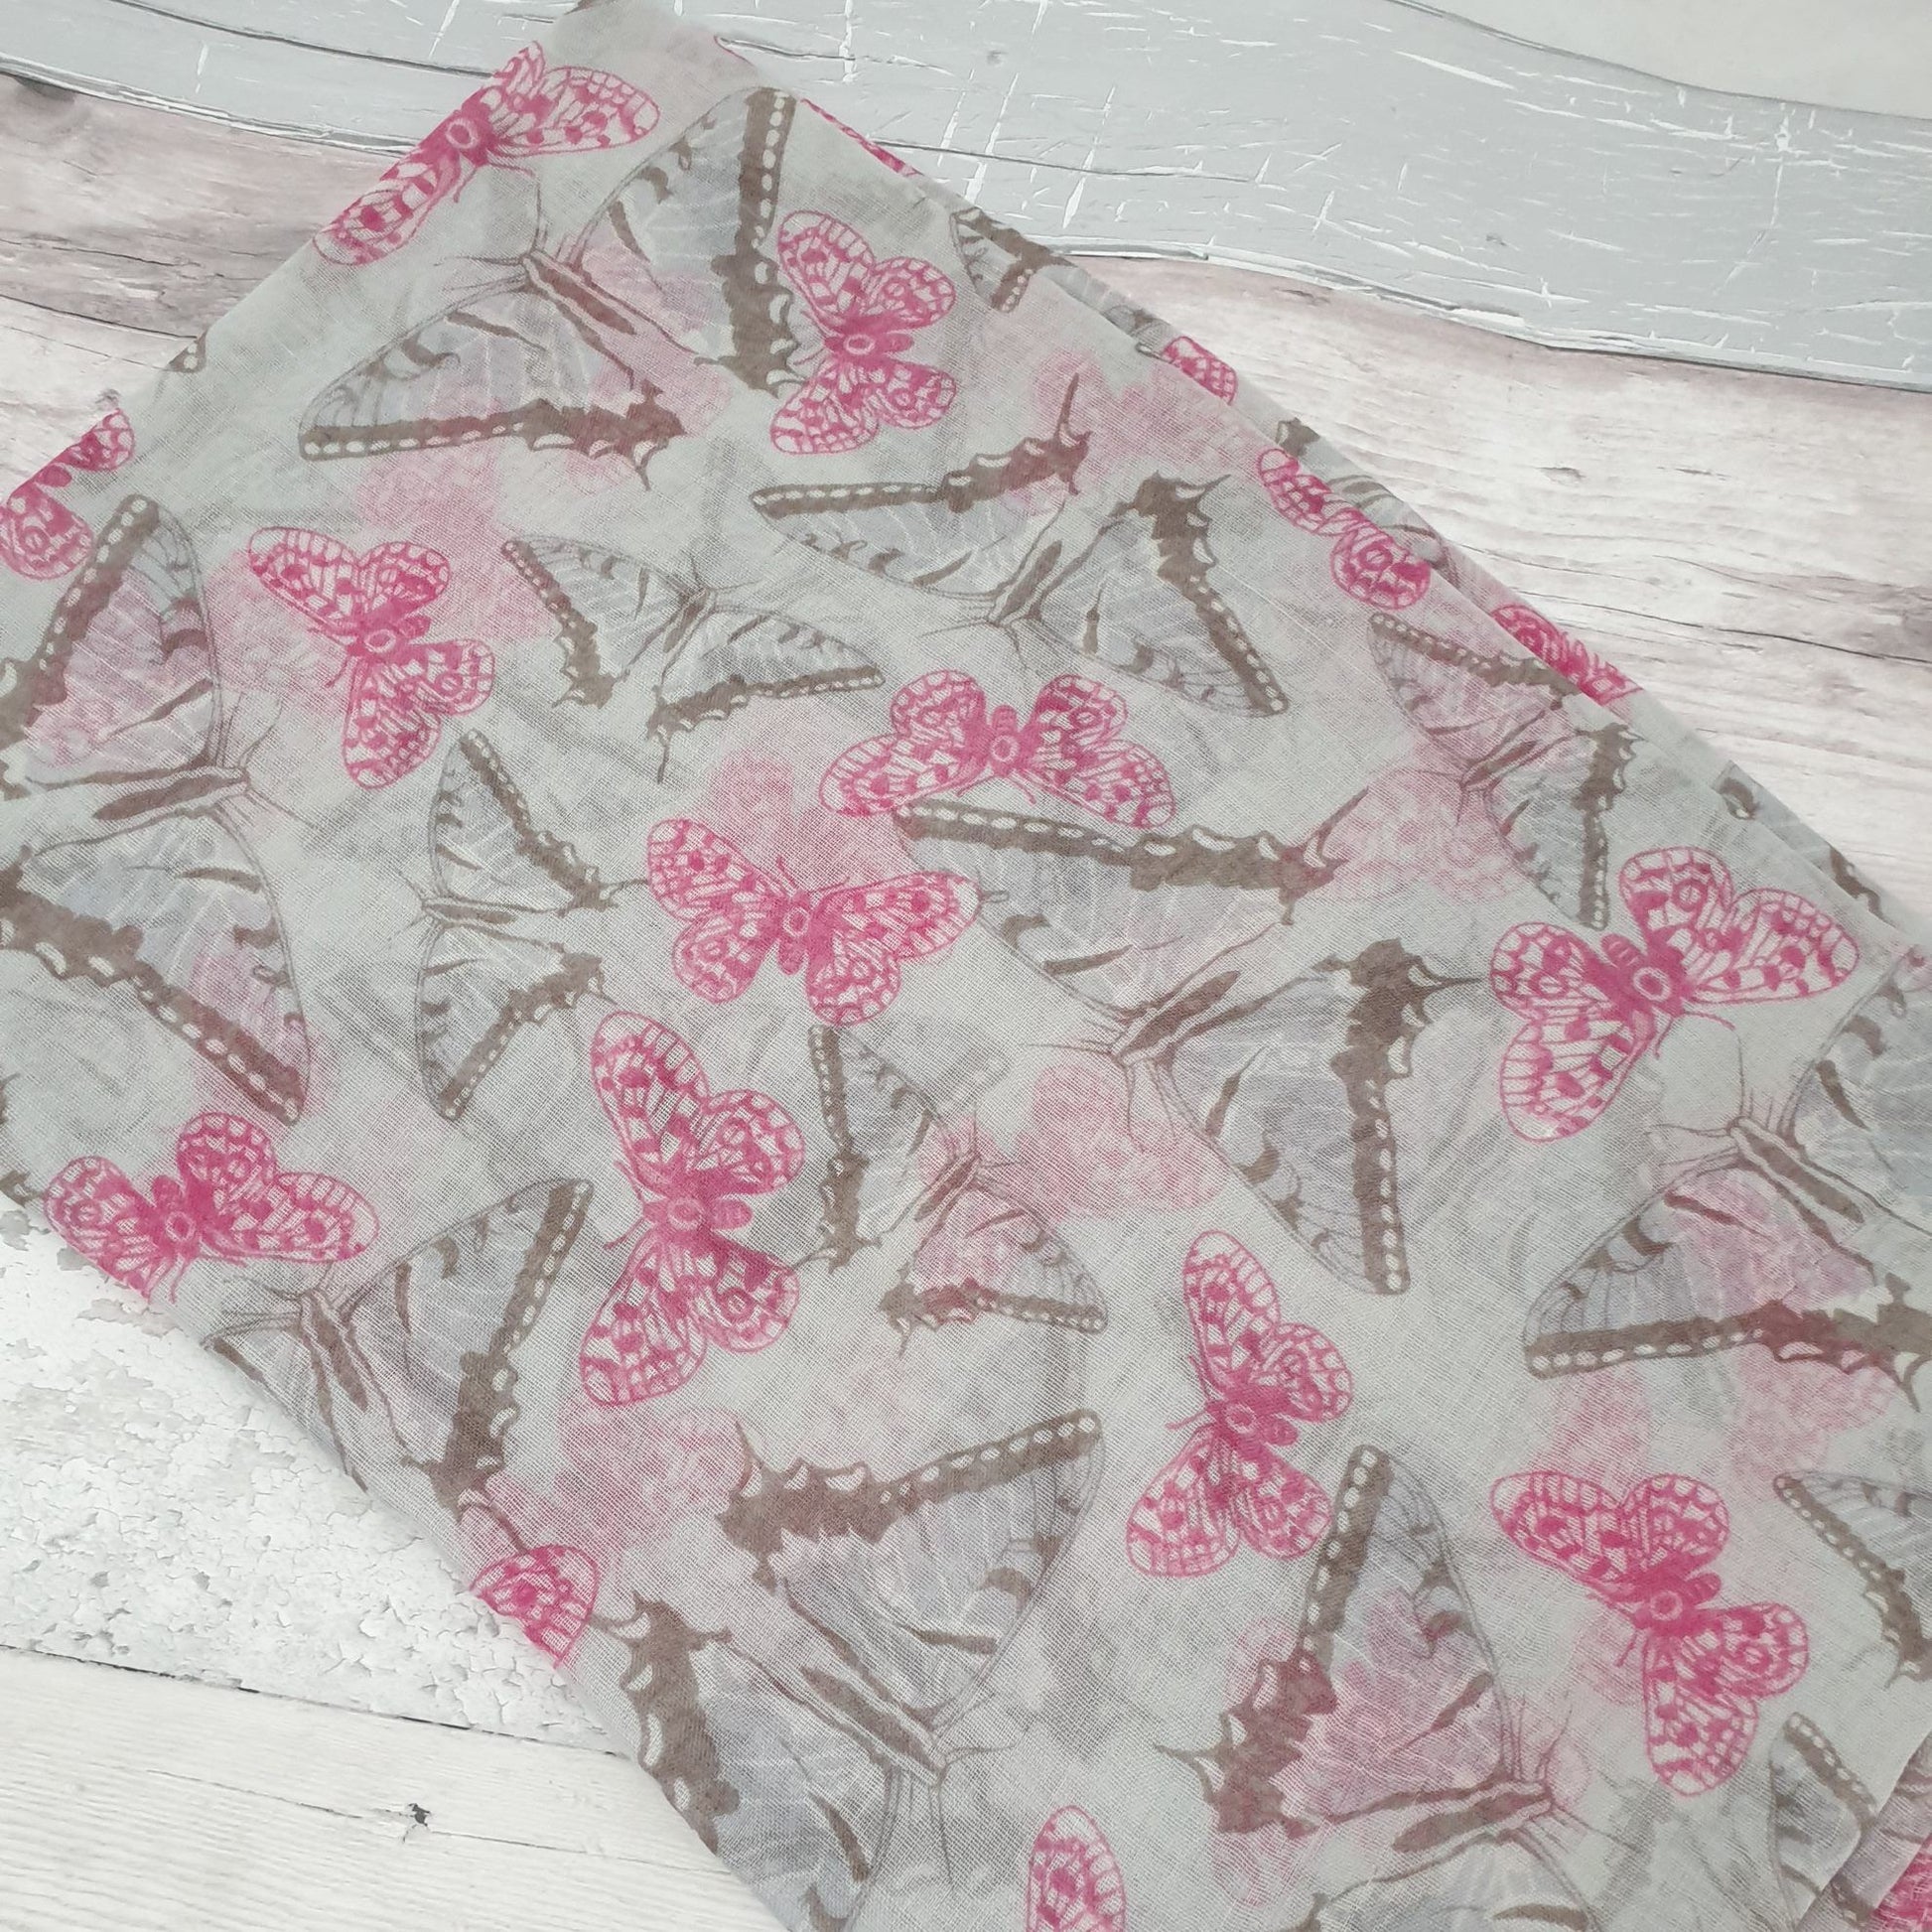 Photo of a light grey scarf covered in pink and monochrome butterflies